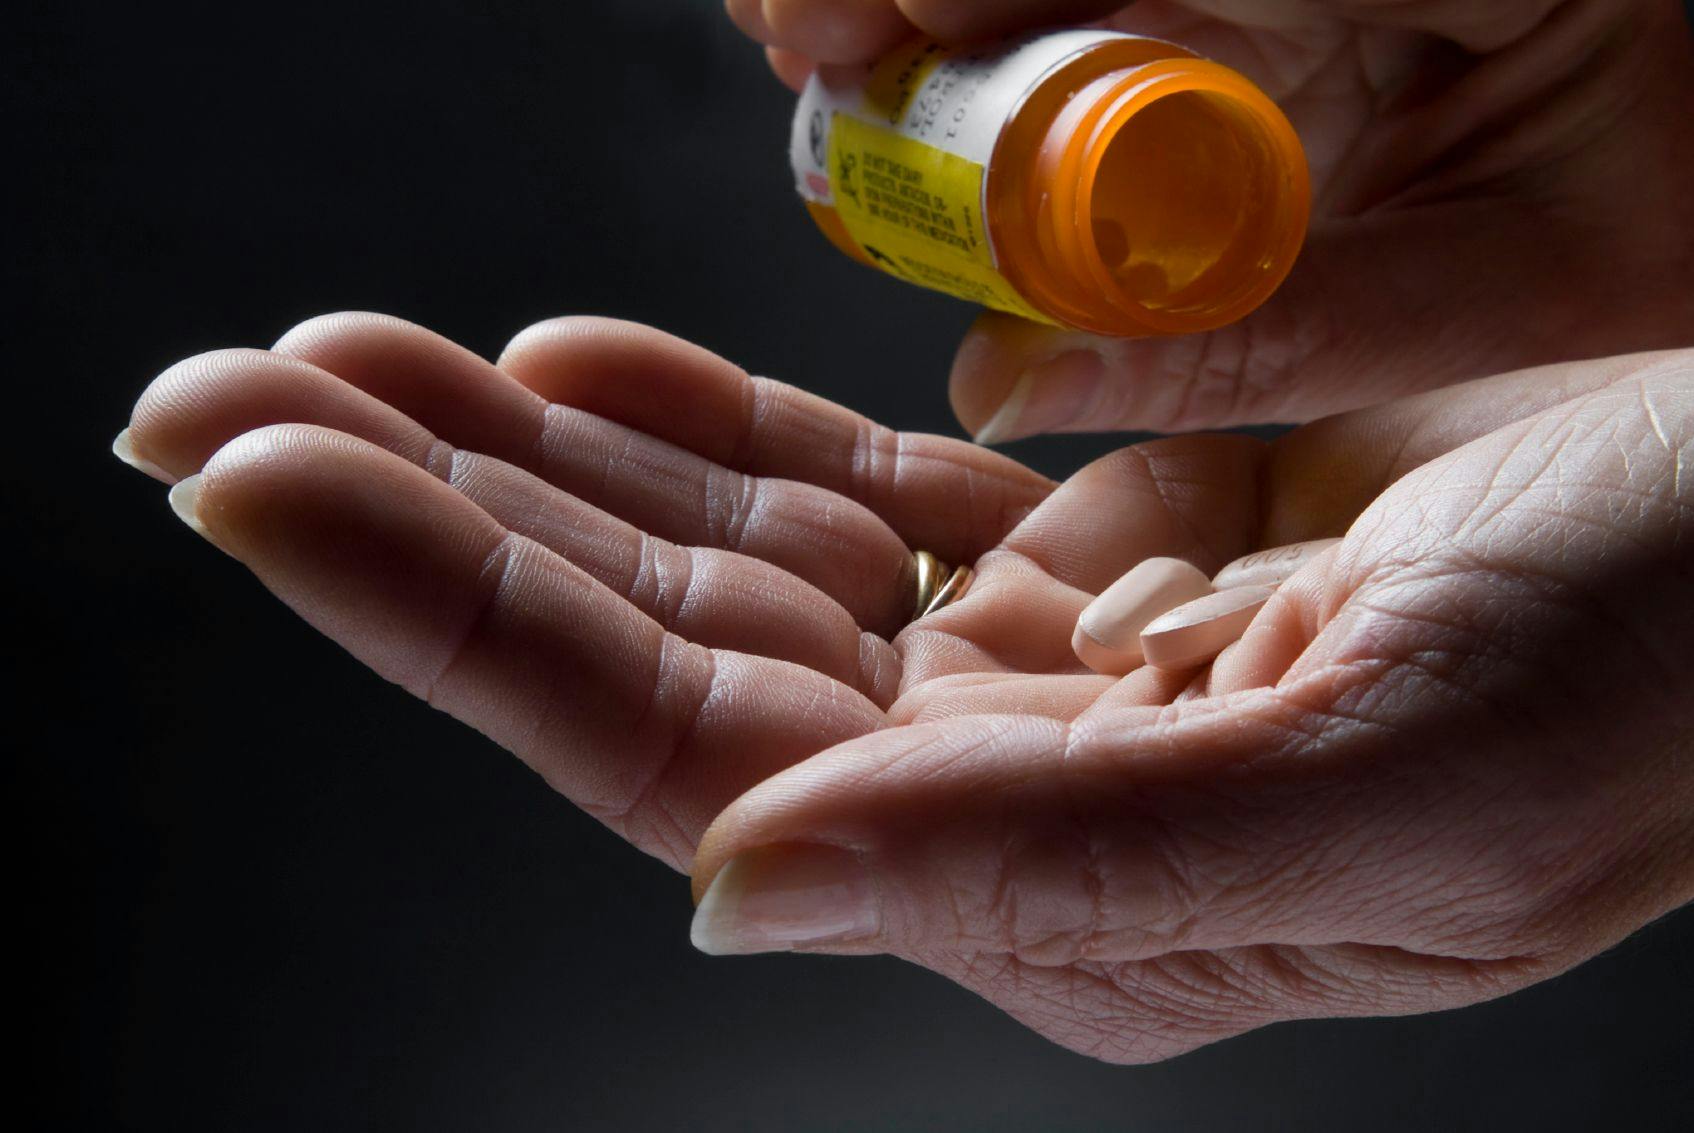 Image of a person pouring three pills into their hand from a pill bottle.